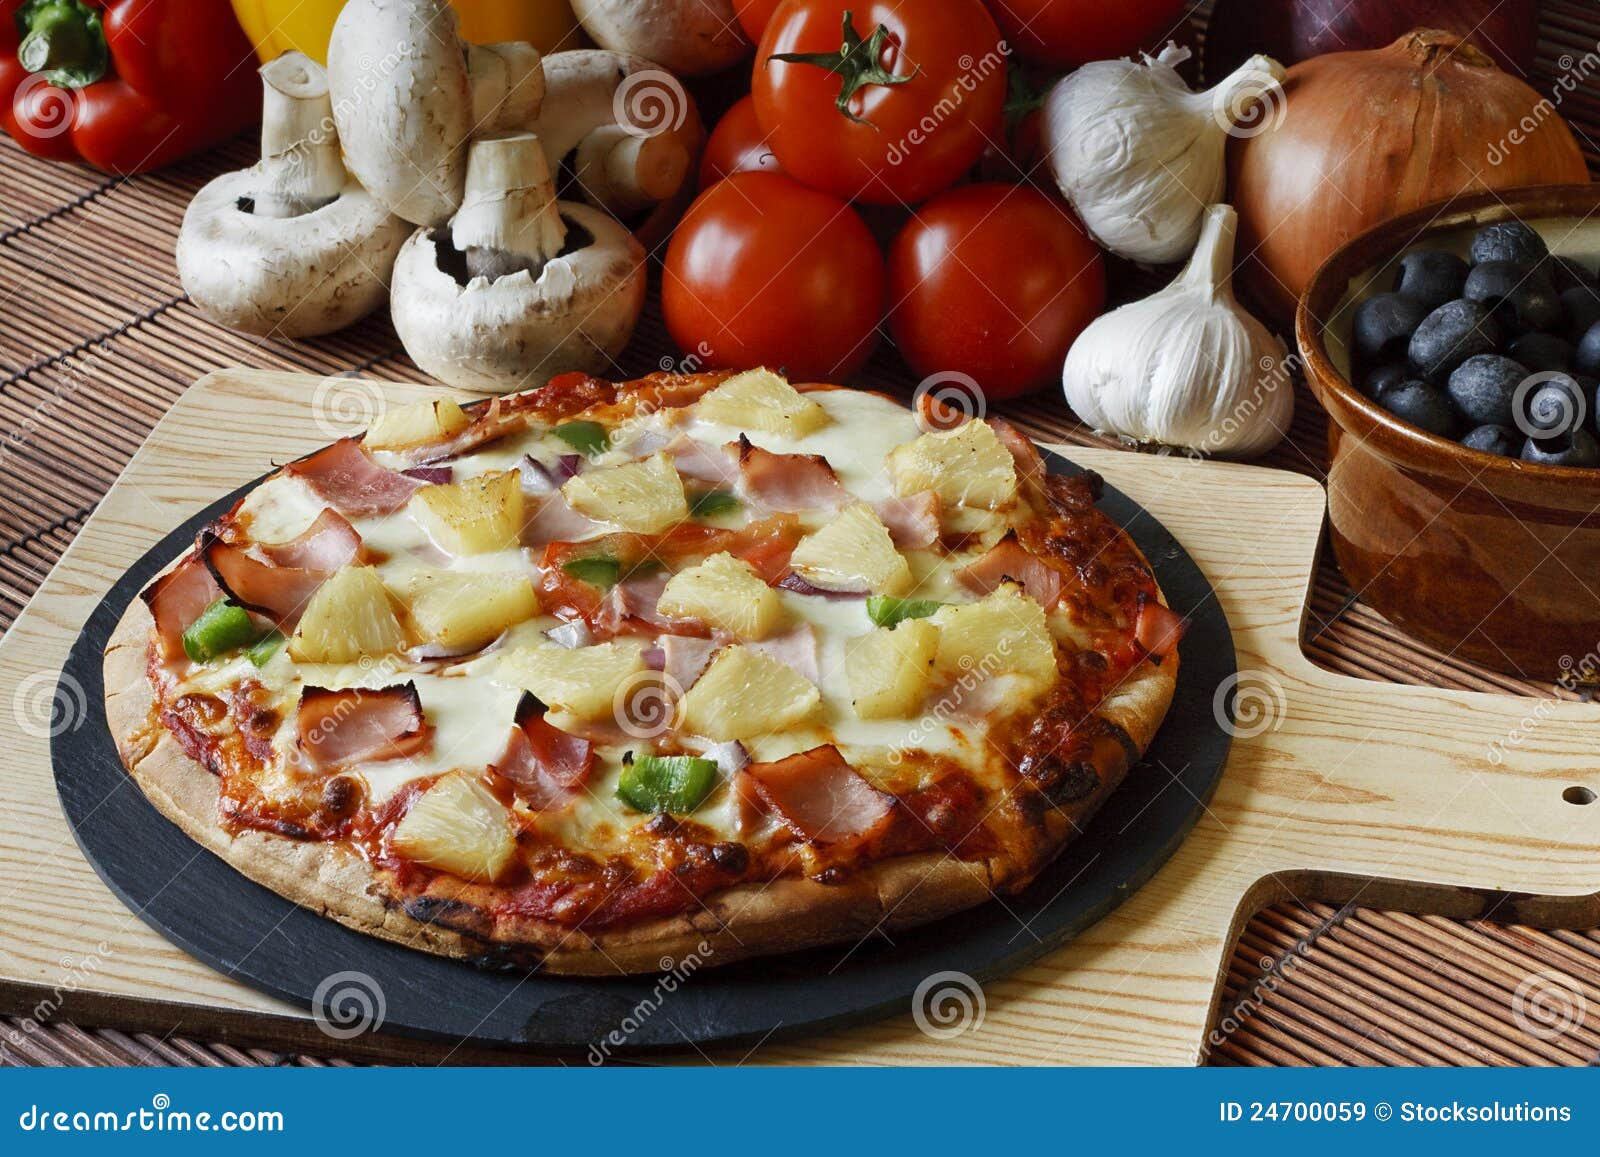 Wood Fired Ham And Pineapple Supreme Pizza Royalty Free Stock Images ...